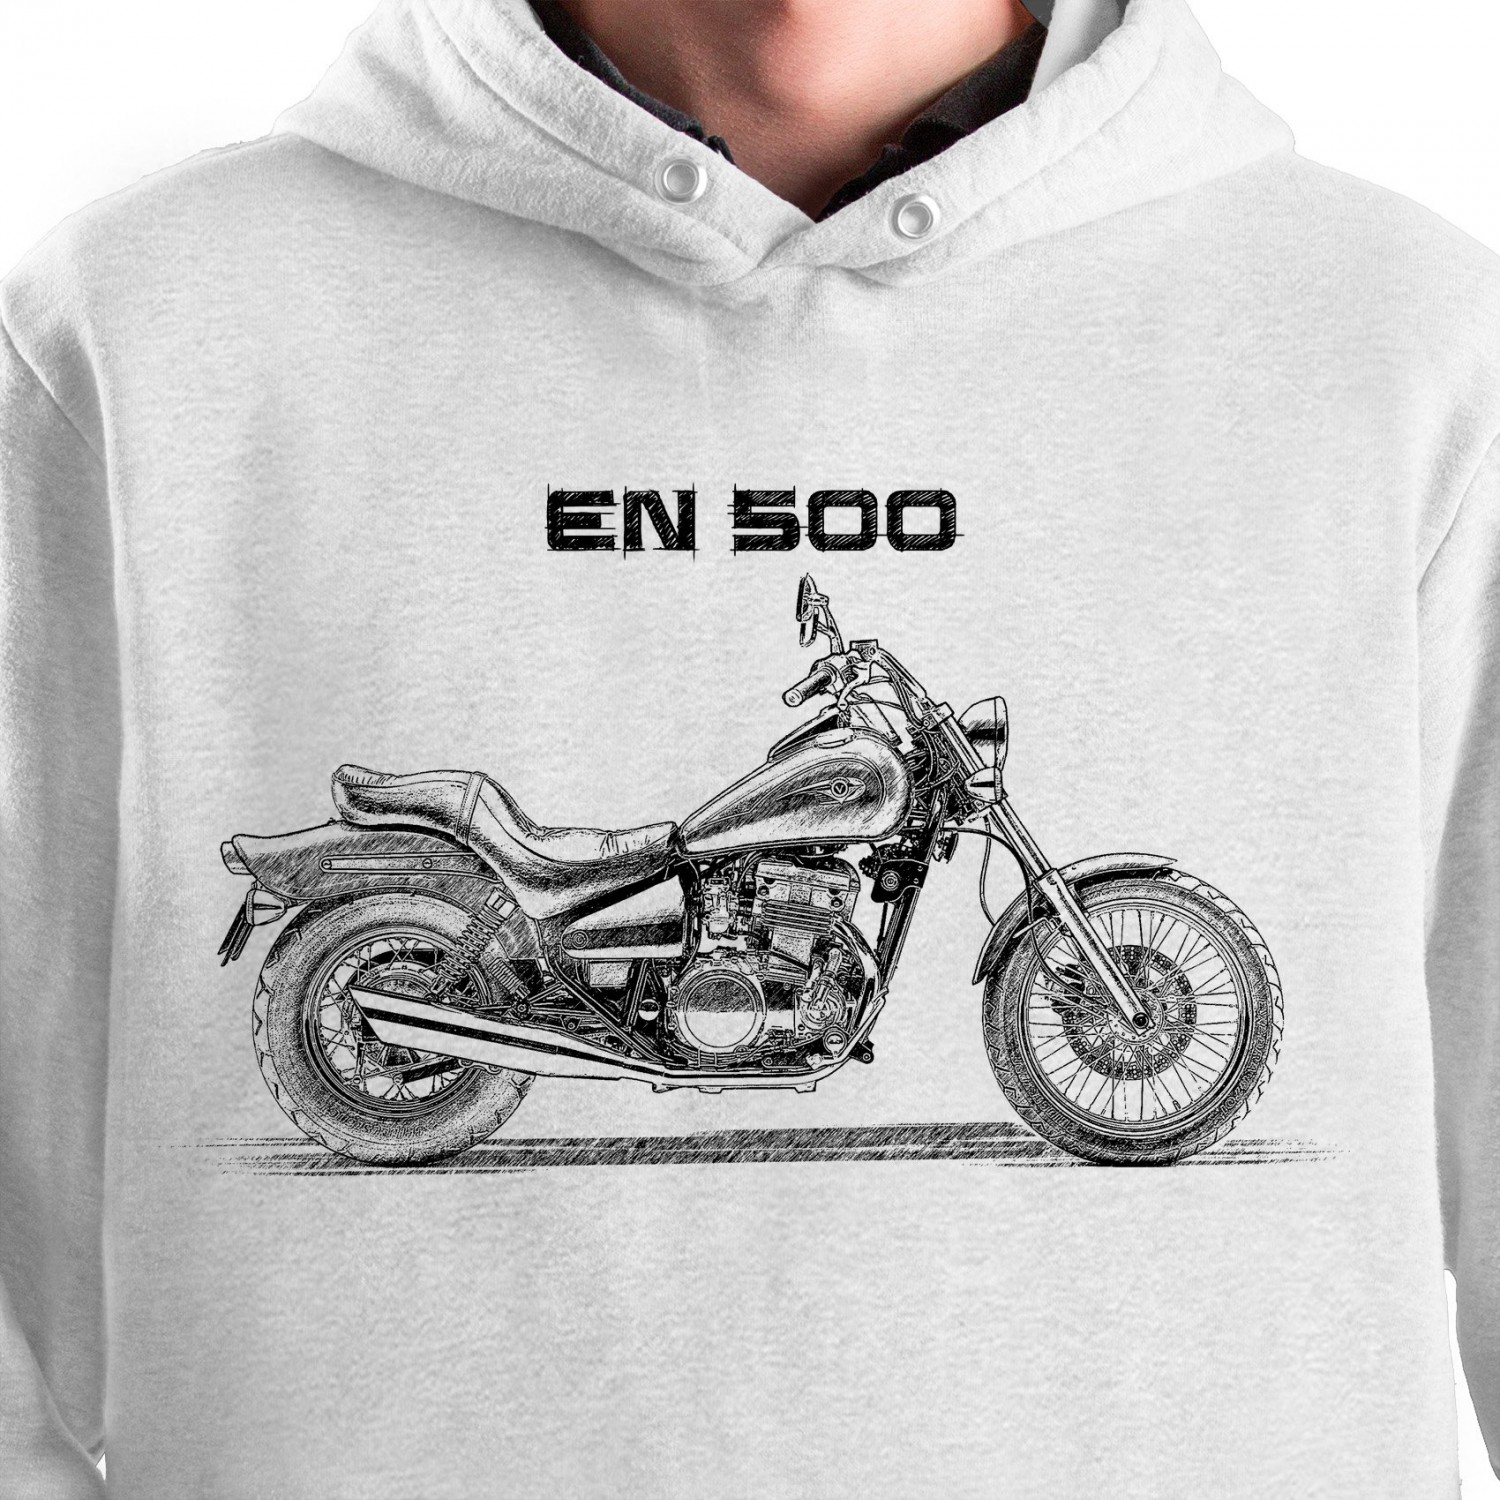 White T-shirt with Kawasaki EN 500. Gift for motorcyclist.